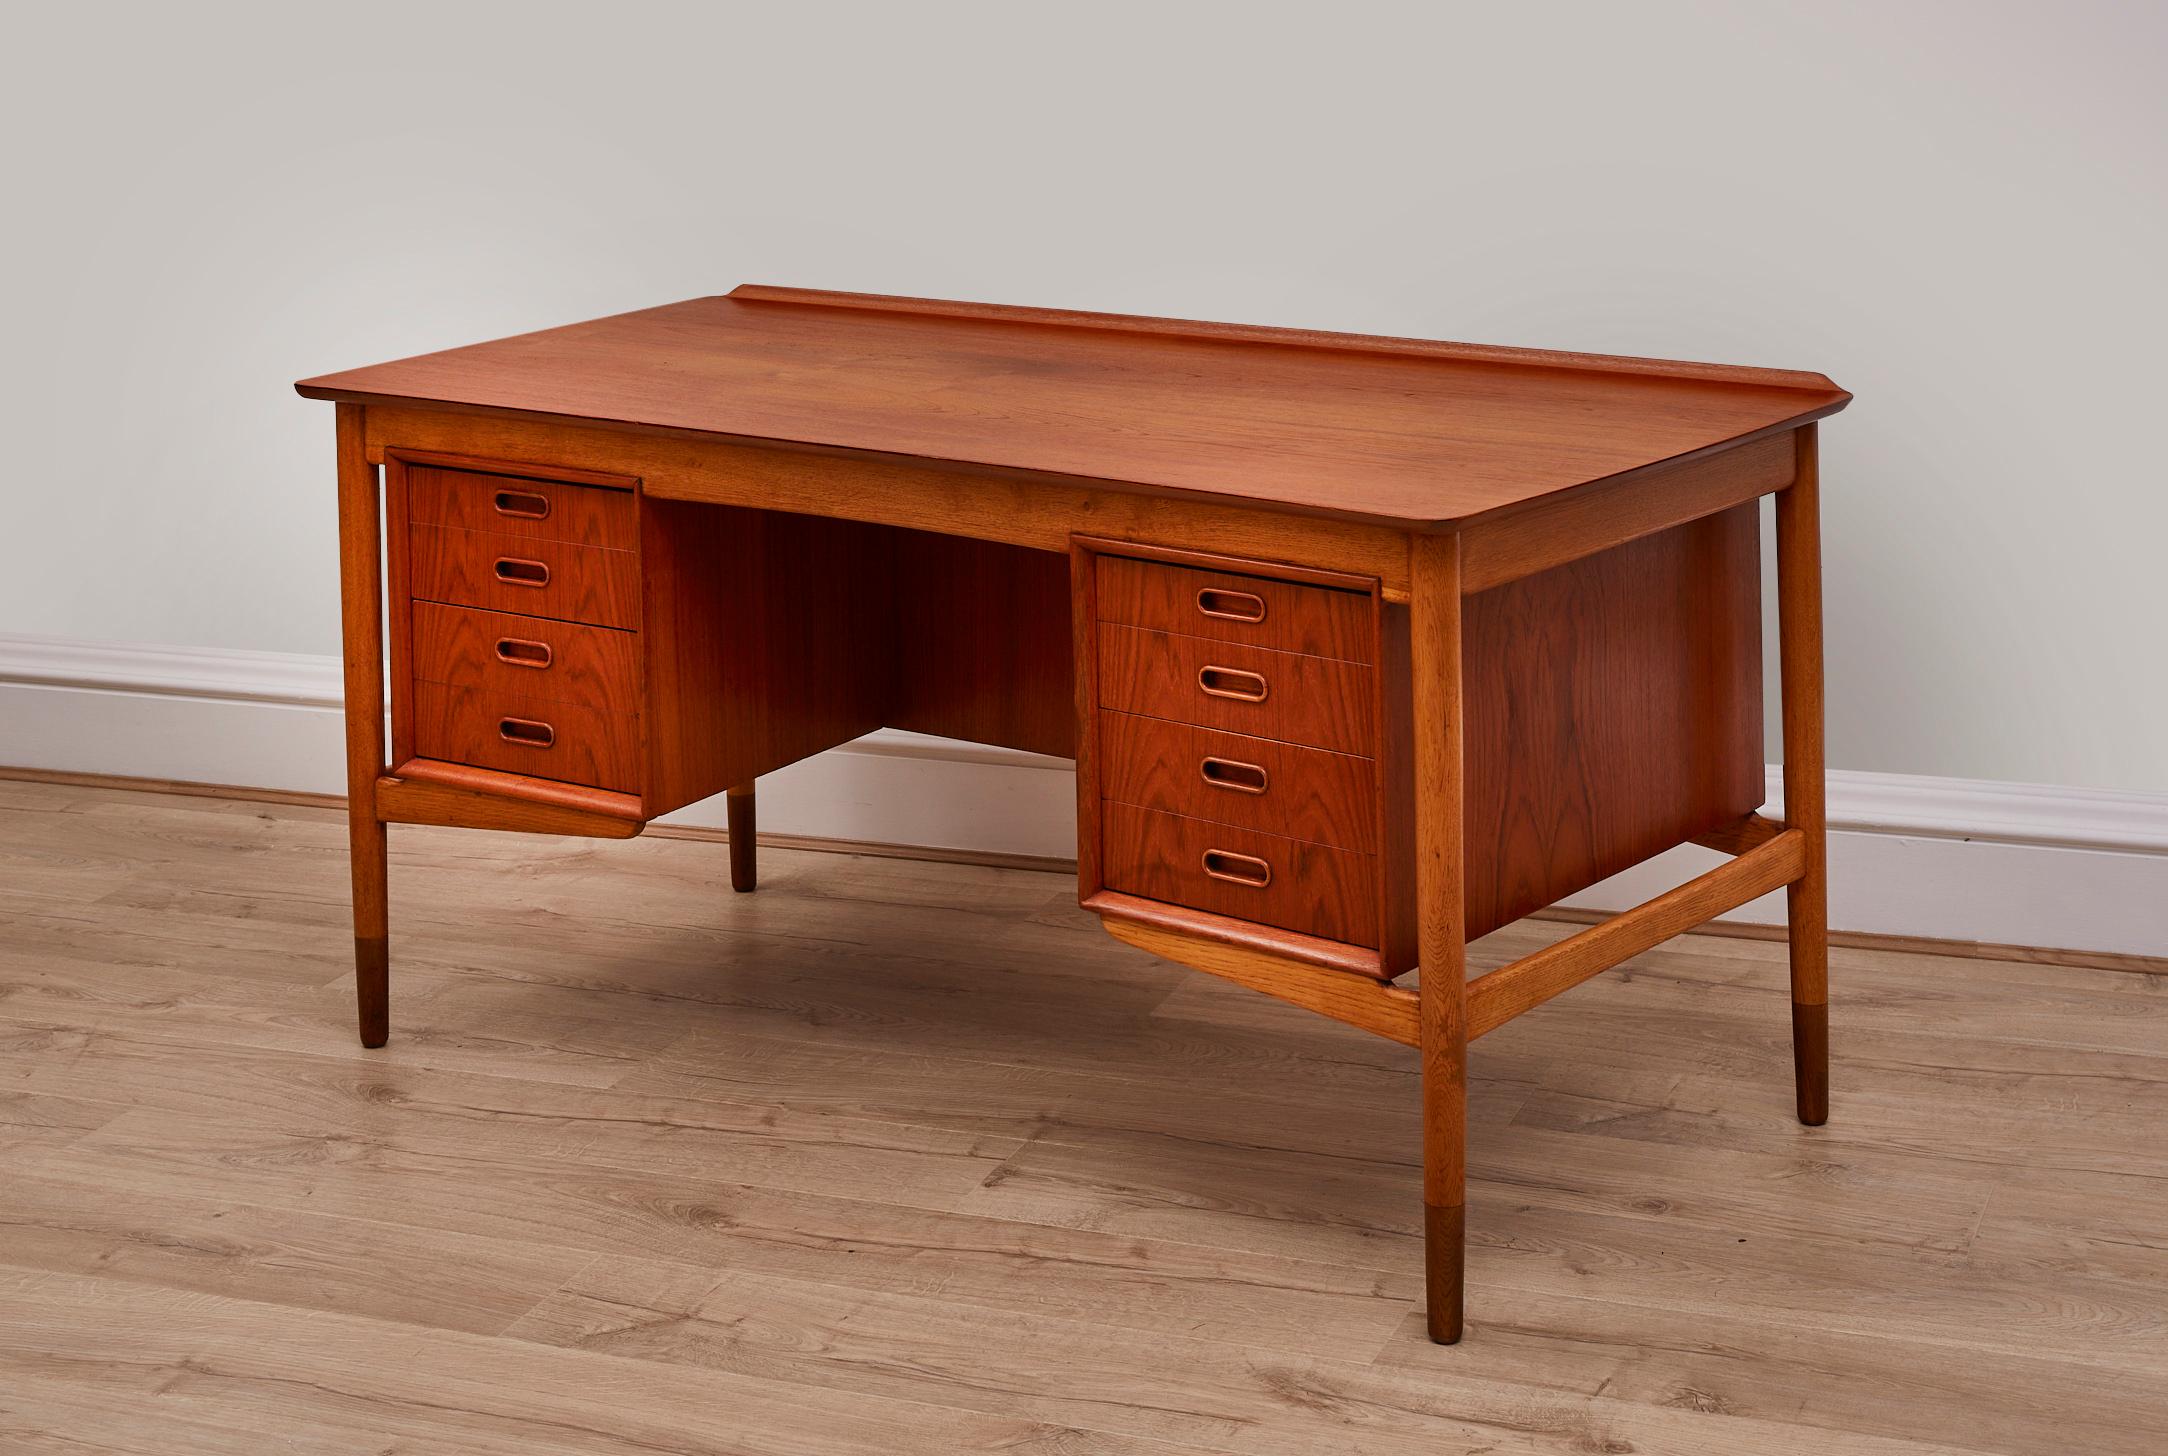 Teak curved desk by Svend Aage Madsen, Denmark 1960s. Very rare.

3 drawers on the left side, 3 on the right side, open back with shelf and small storage unit.

Extremely good vintage condition. Repolished.  Signed with the manufacturer.